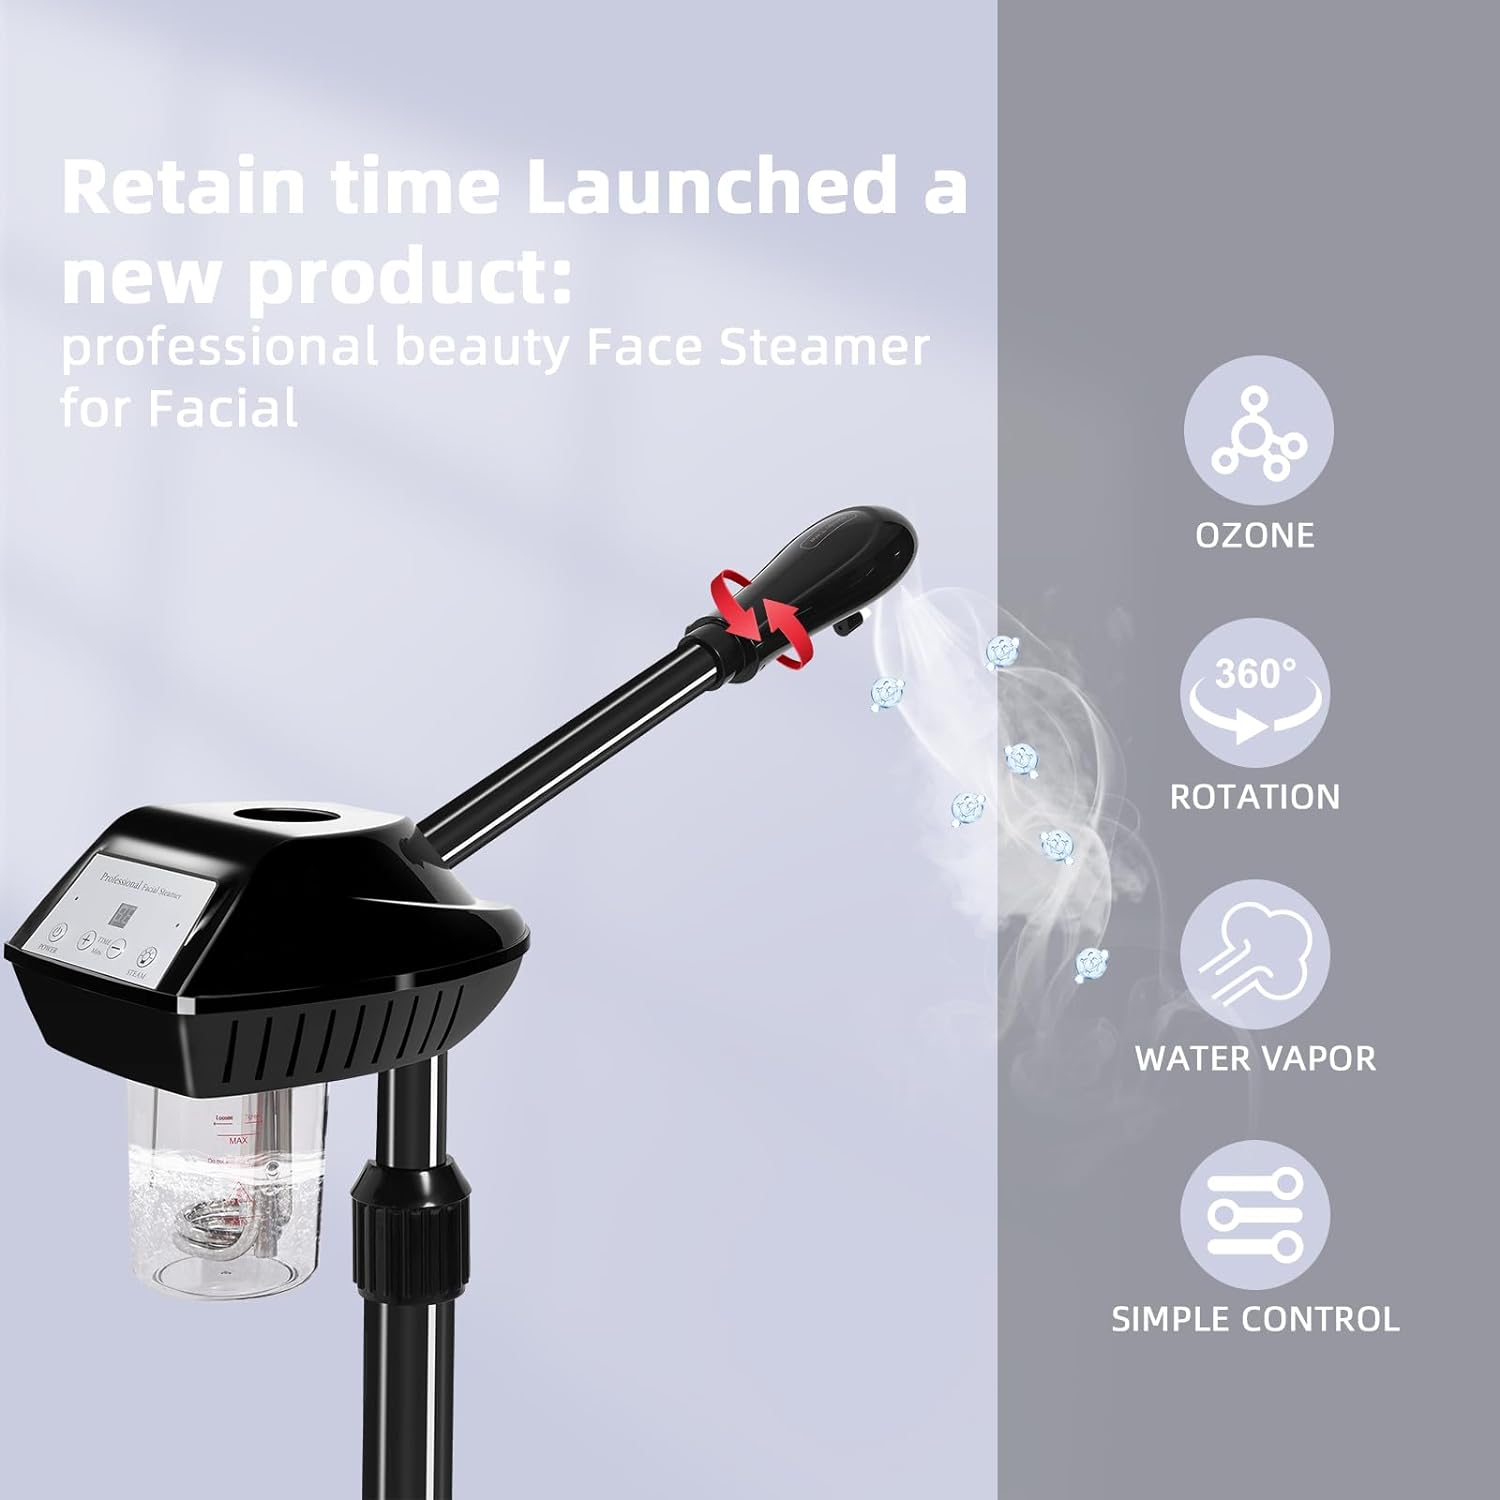 Retain time Professional Facial Steamer, Facial Steamer on on Wheels with More Steam, Adjustable Height for Face Steamer Suitable for Personal and Professional Personal Care Places.